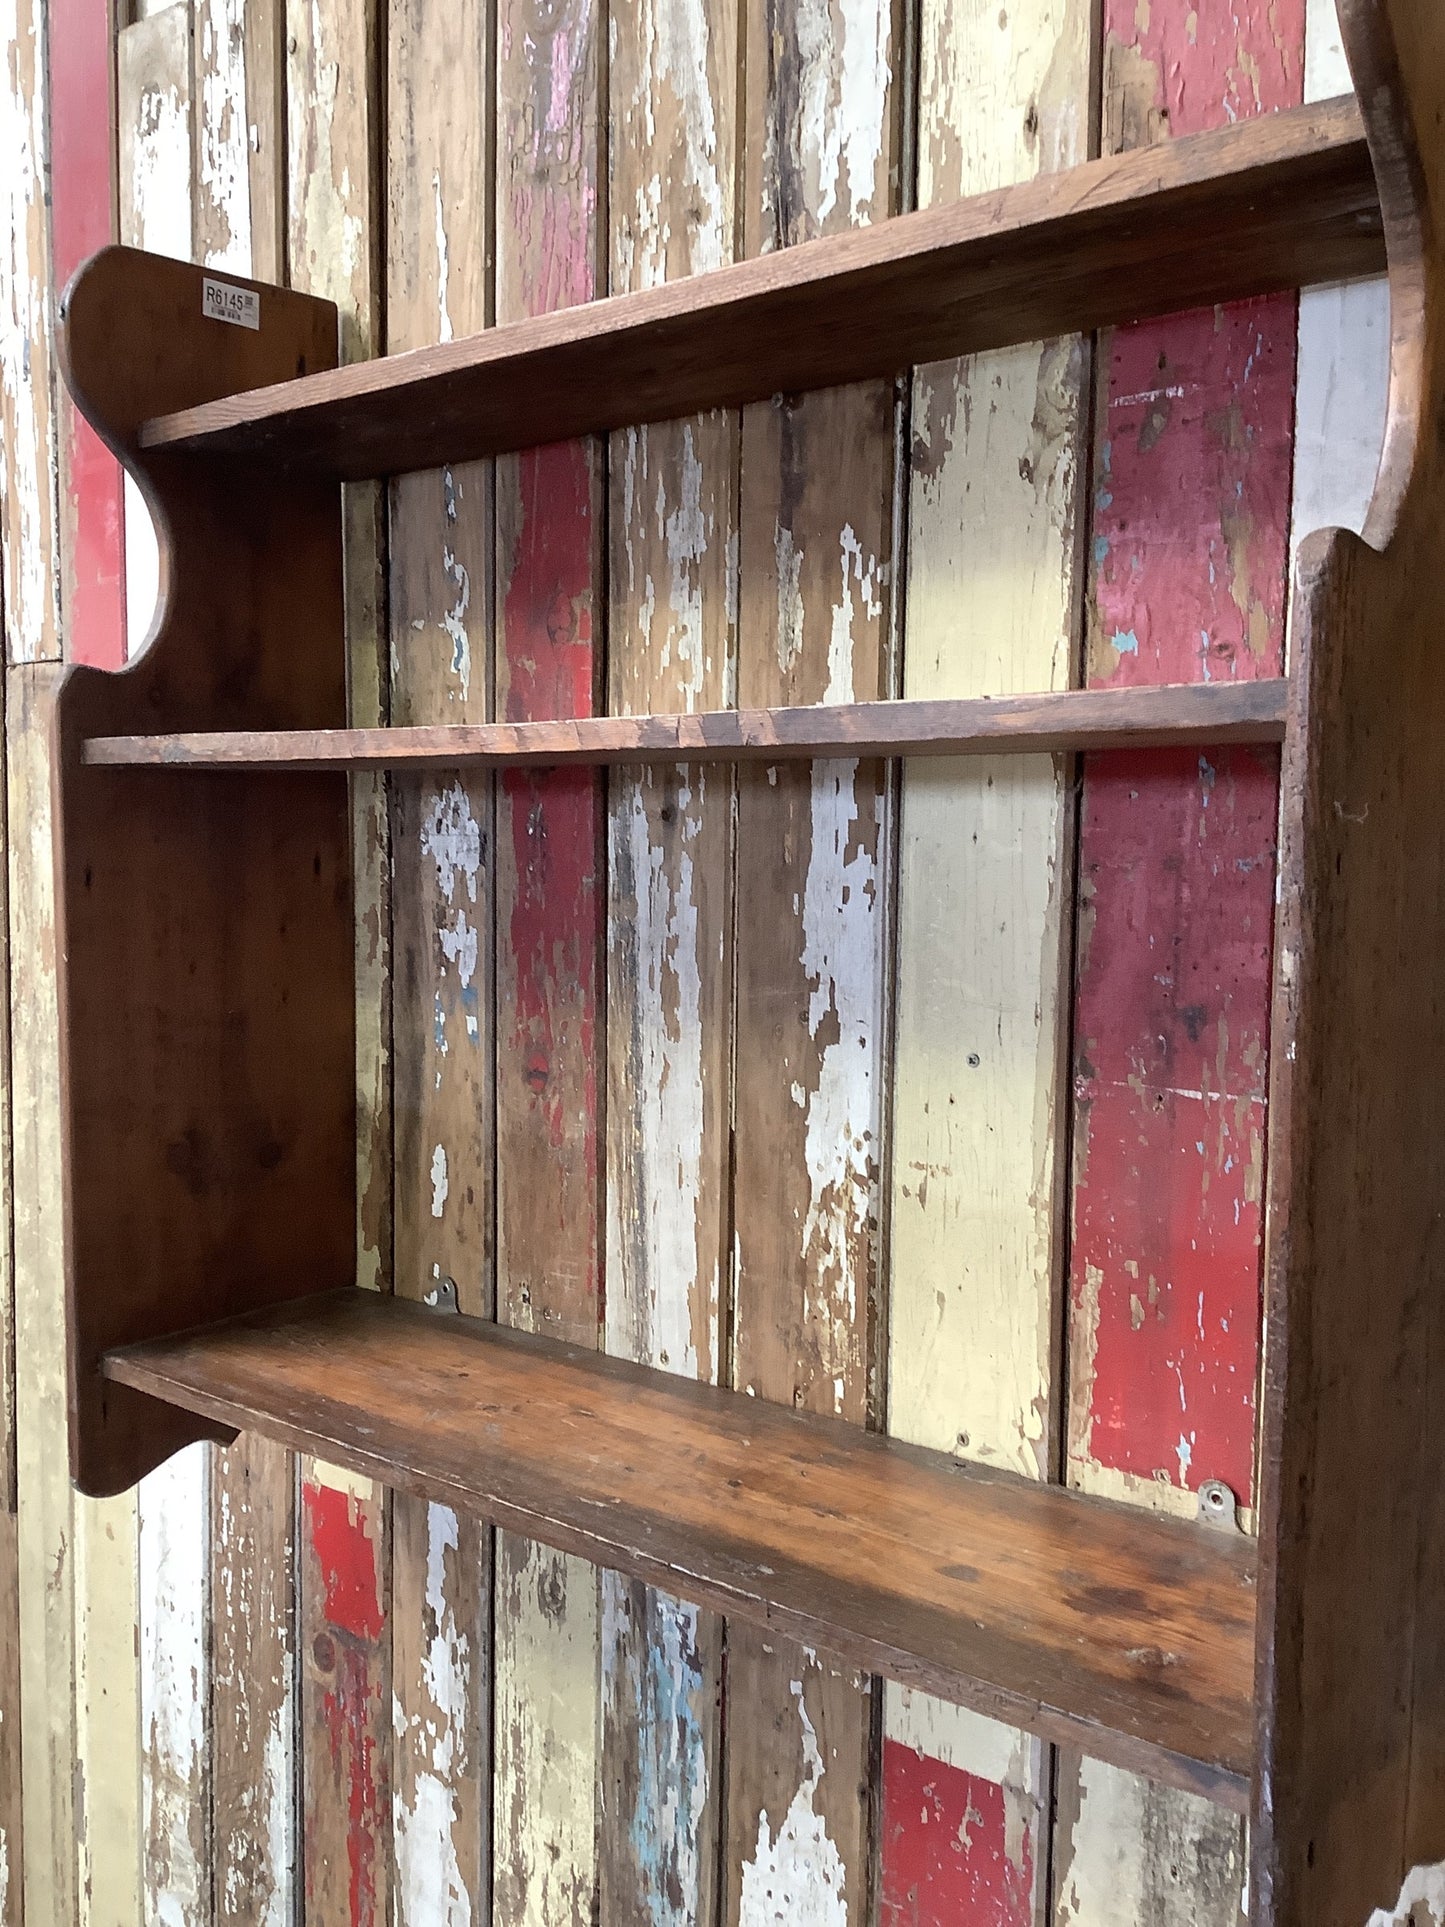 Rustic Old Varnished Wall Pine Kitchen 3 Shelves Wooden 2'8"H 2'8" W